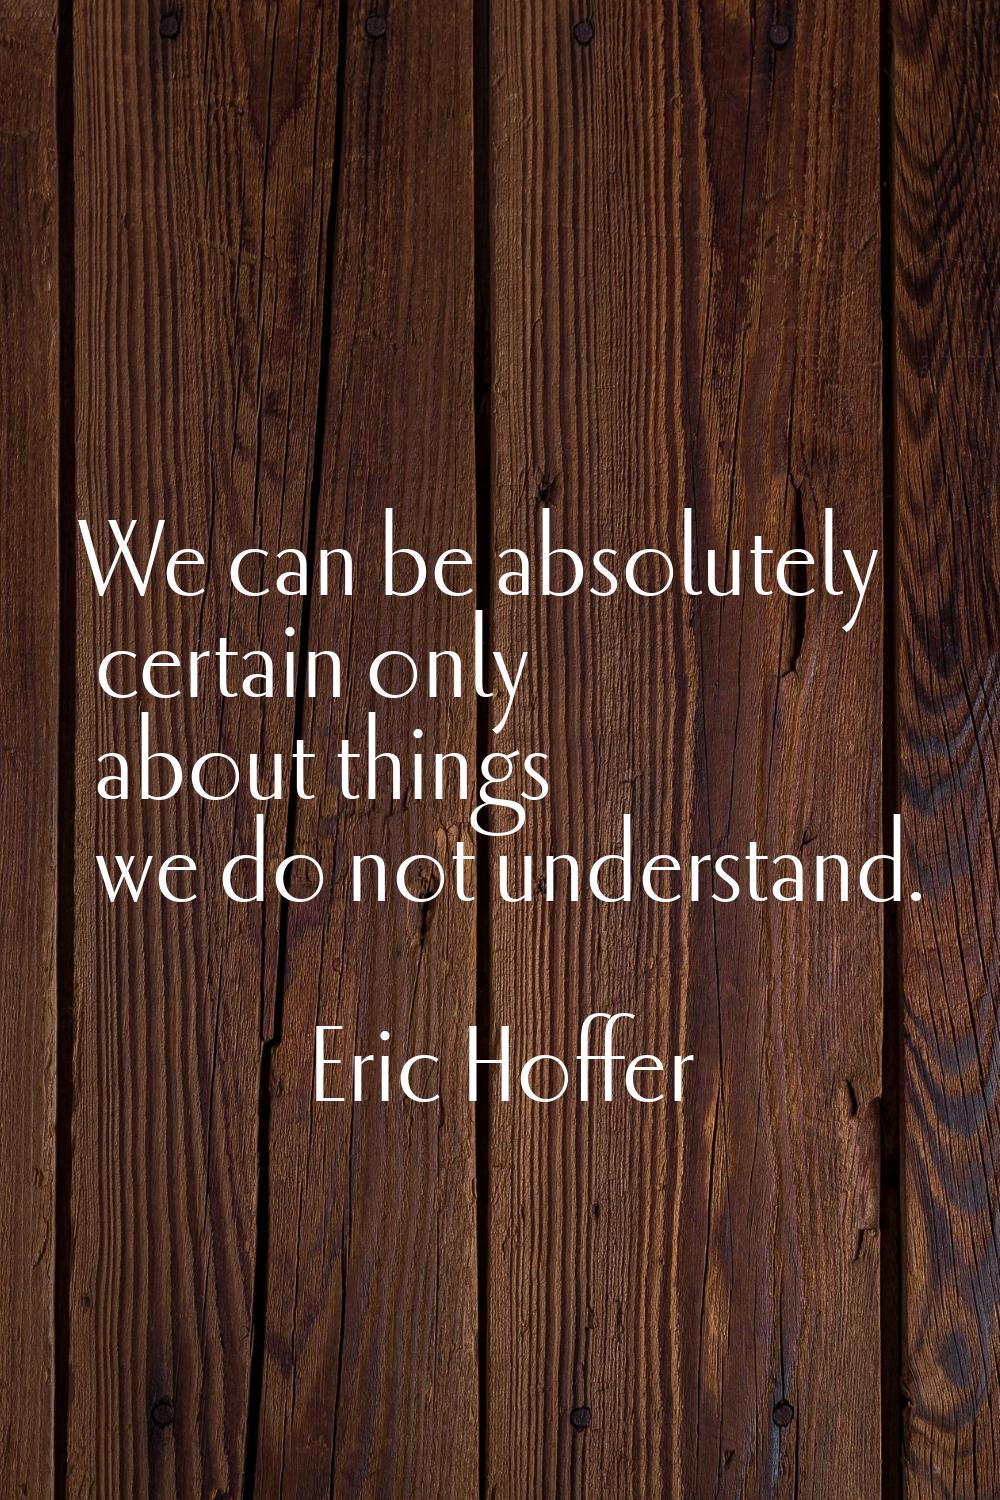 We can be absolutely certain only about things we do not understand.